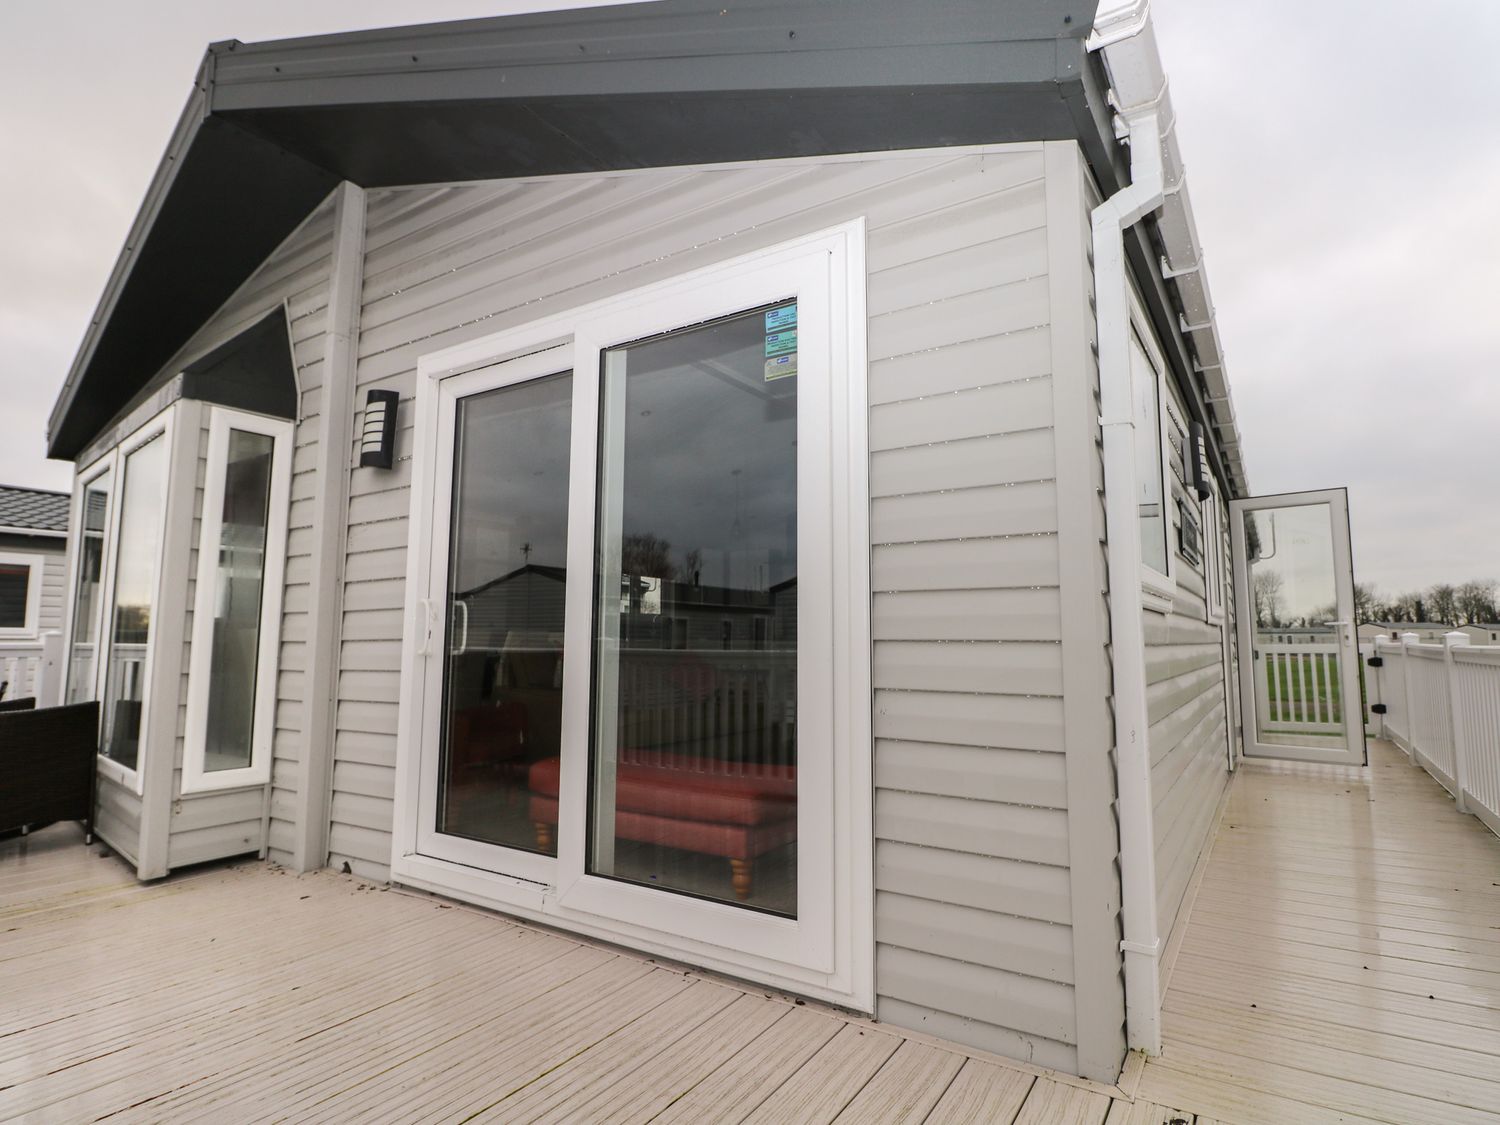 Lodge at Chichester Lakeside (3 Bed) - Kent & Sussex - 1094585 - photo 1